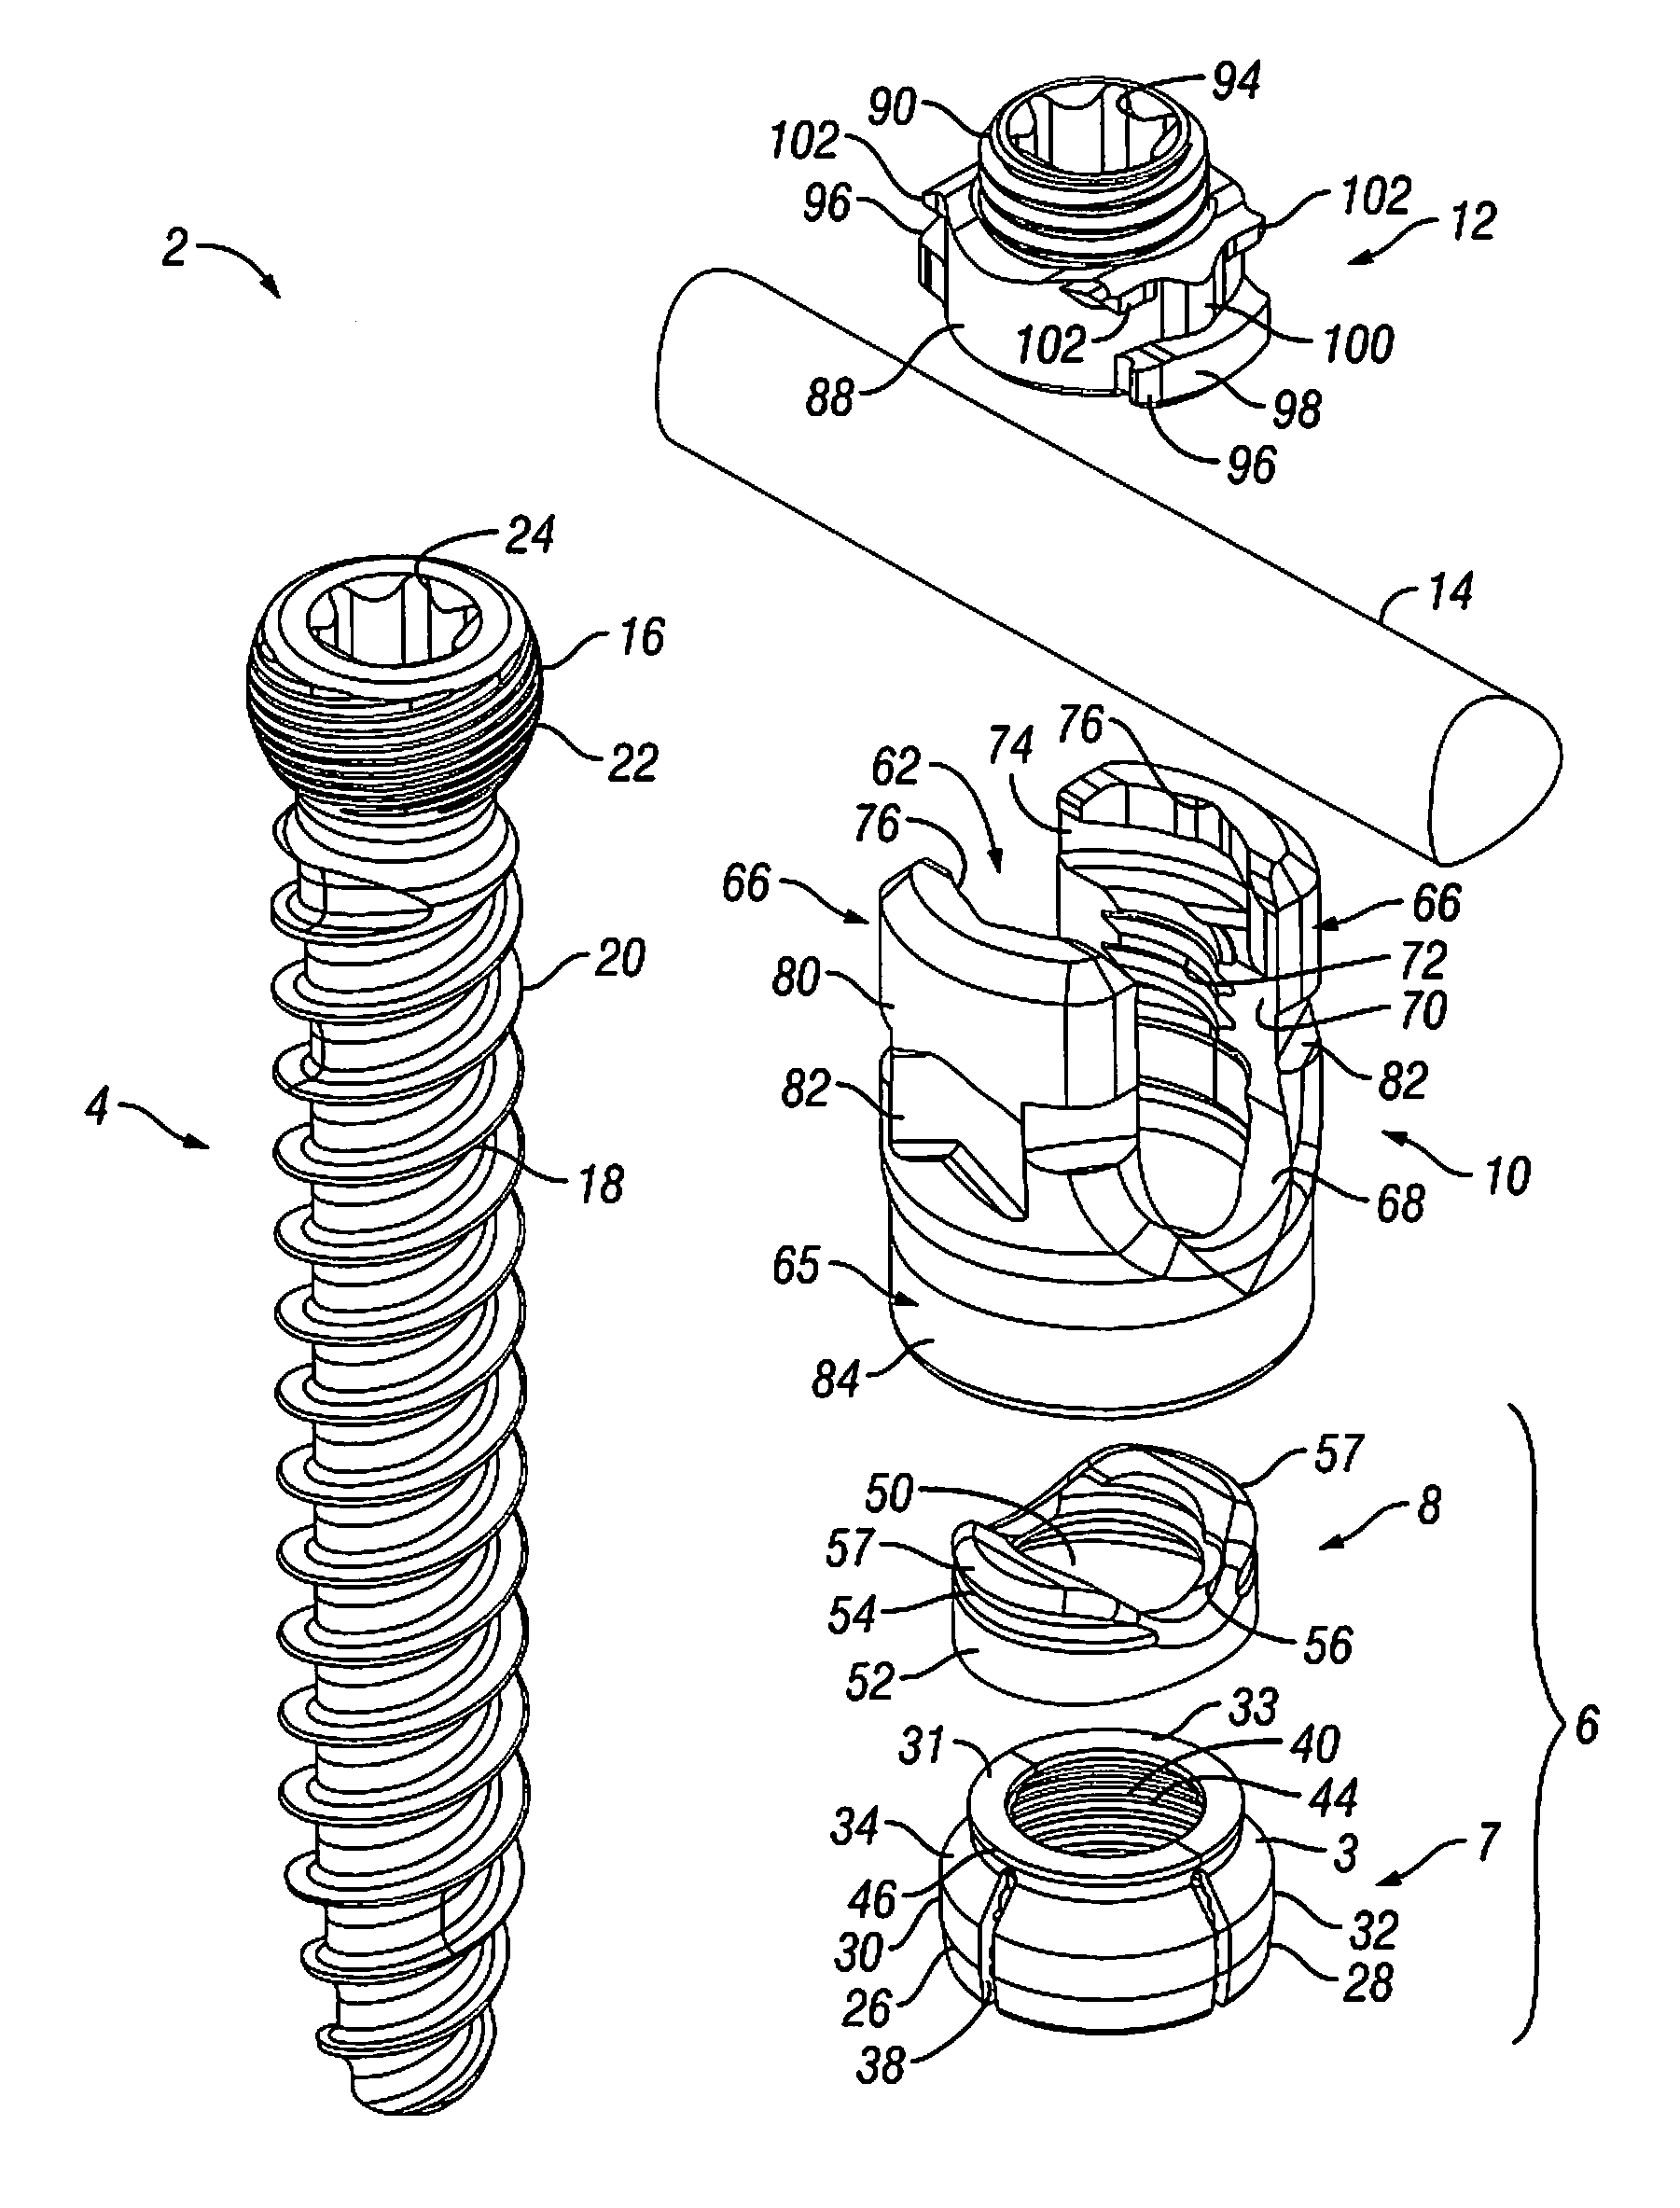 Orthopedic fixation devices and methods of installation thereof